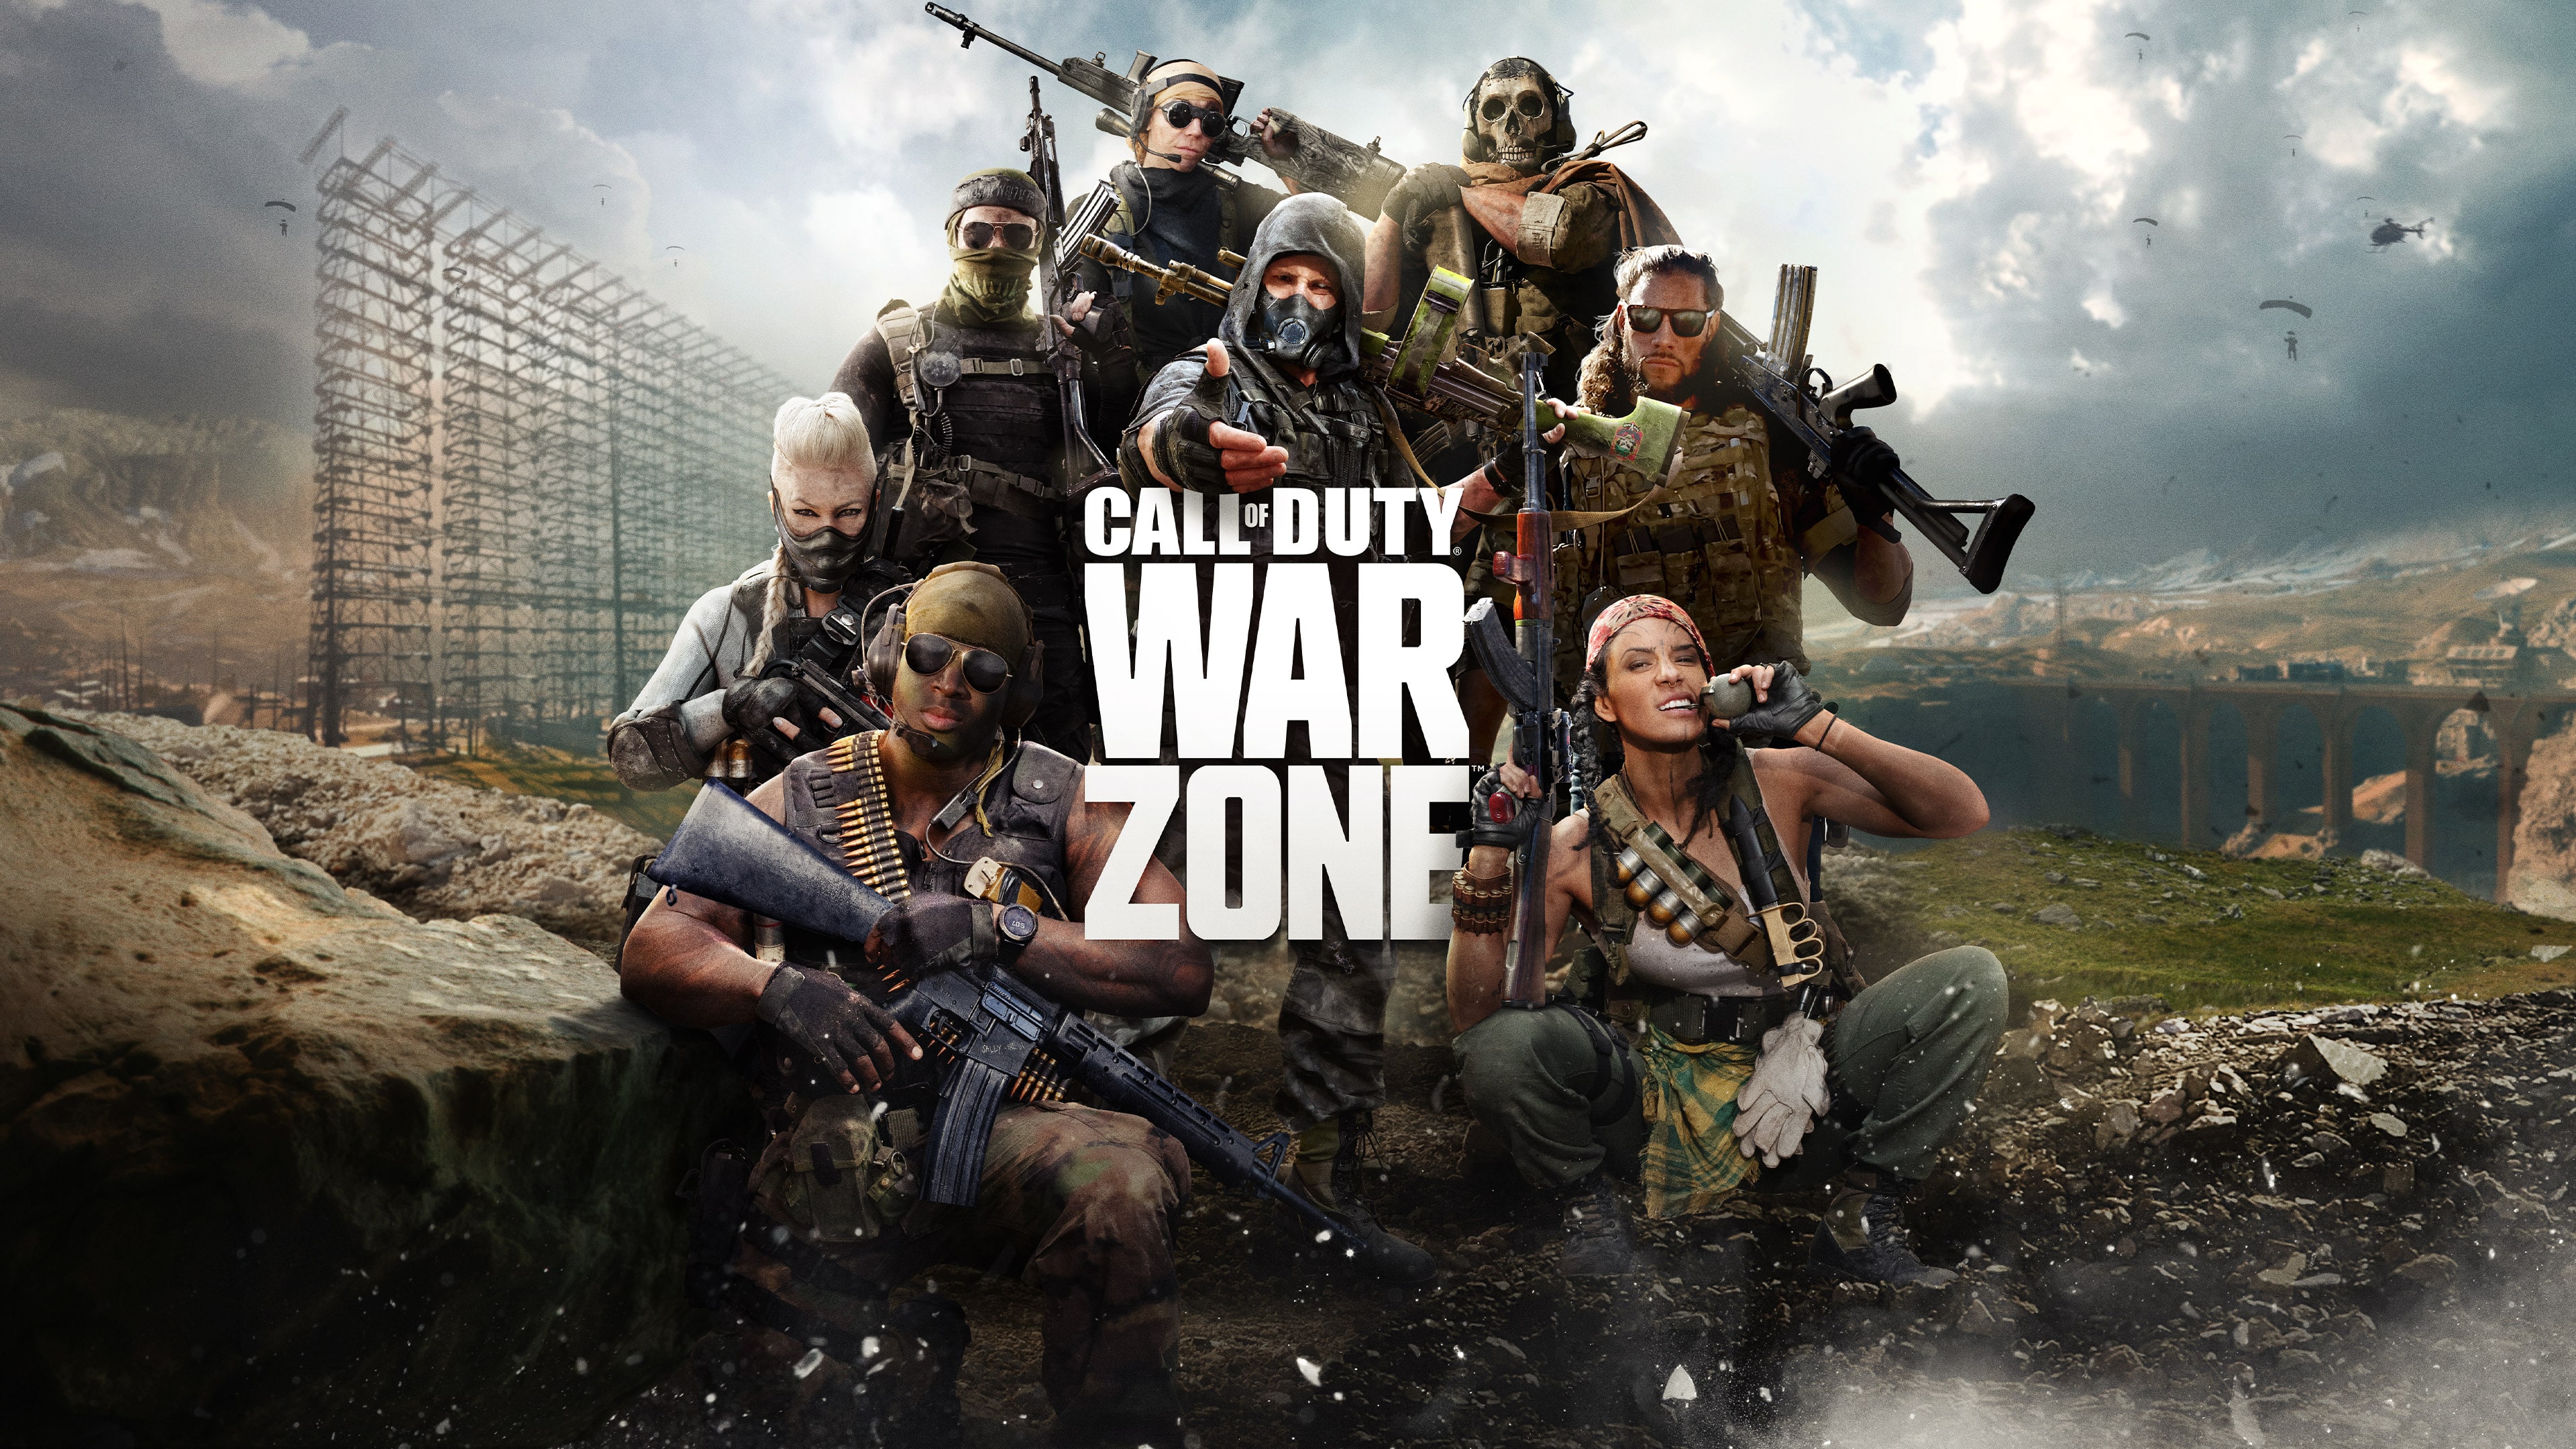 Warzone mobile play market. Рамка легенды Call of Duty. Last Call игра. Warzone last Stand.